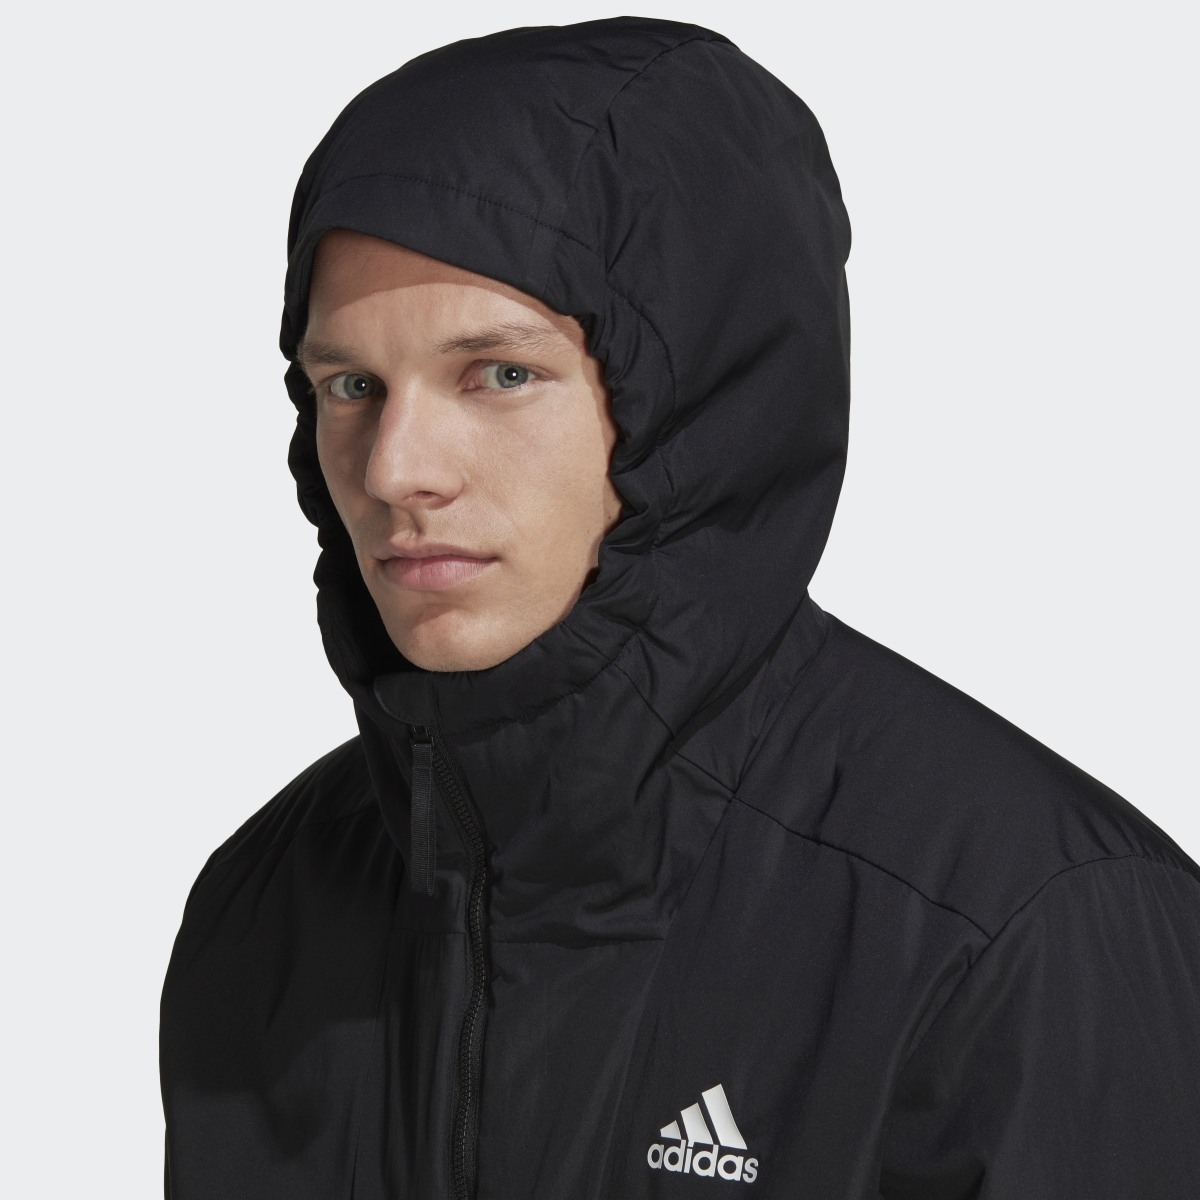 Adidas Back to Sport Hooded Jacket. 7